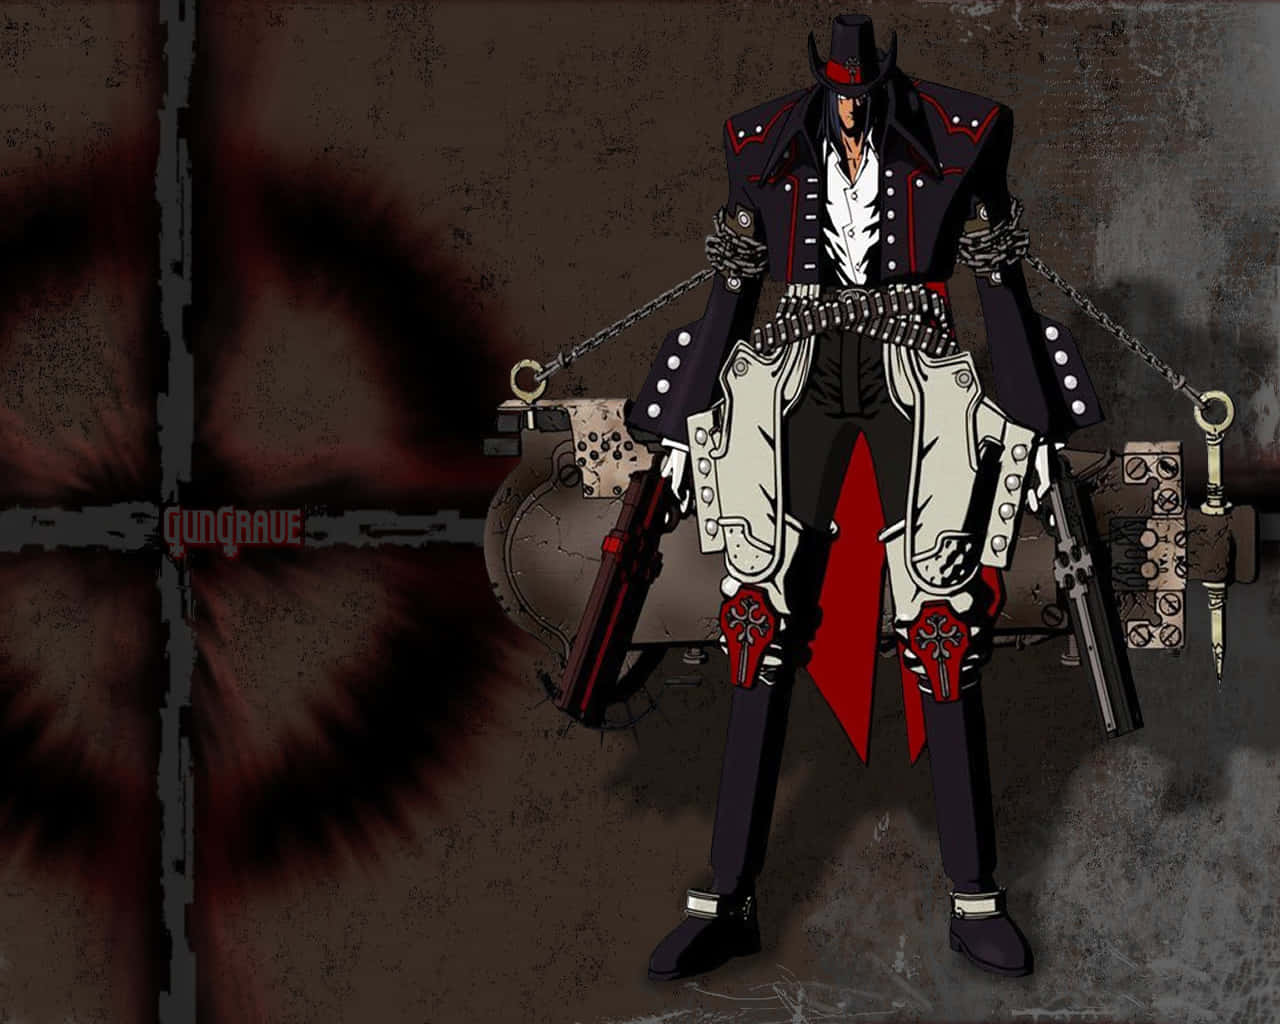 Fotos - Gungrave Beyond The Grave | Anime fighting games, Grave, Character  poses